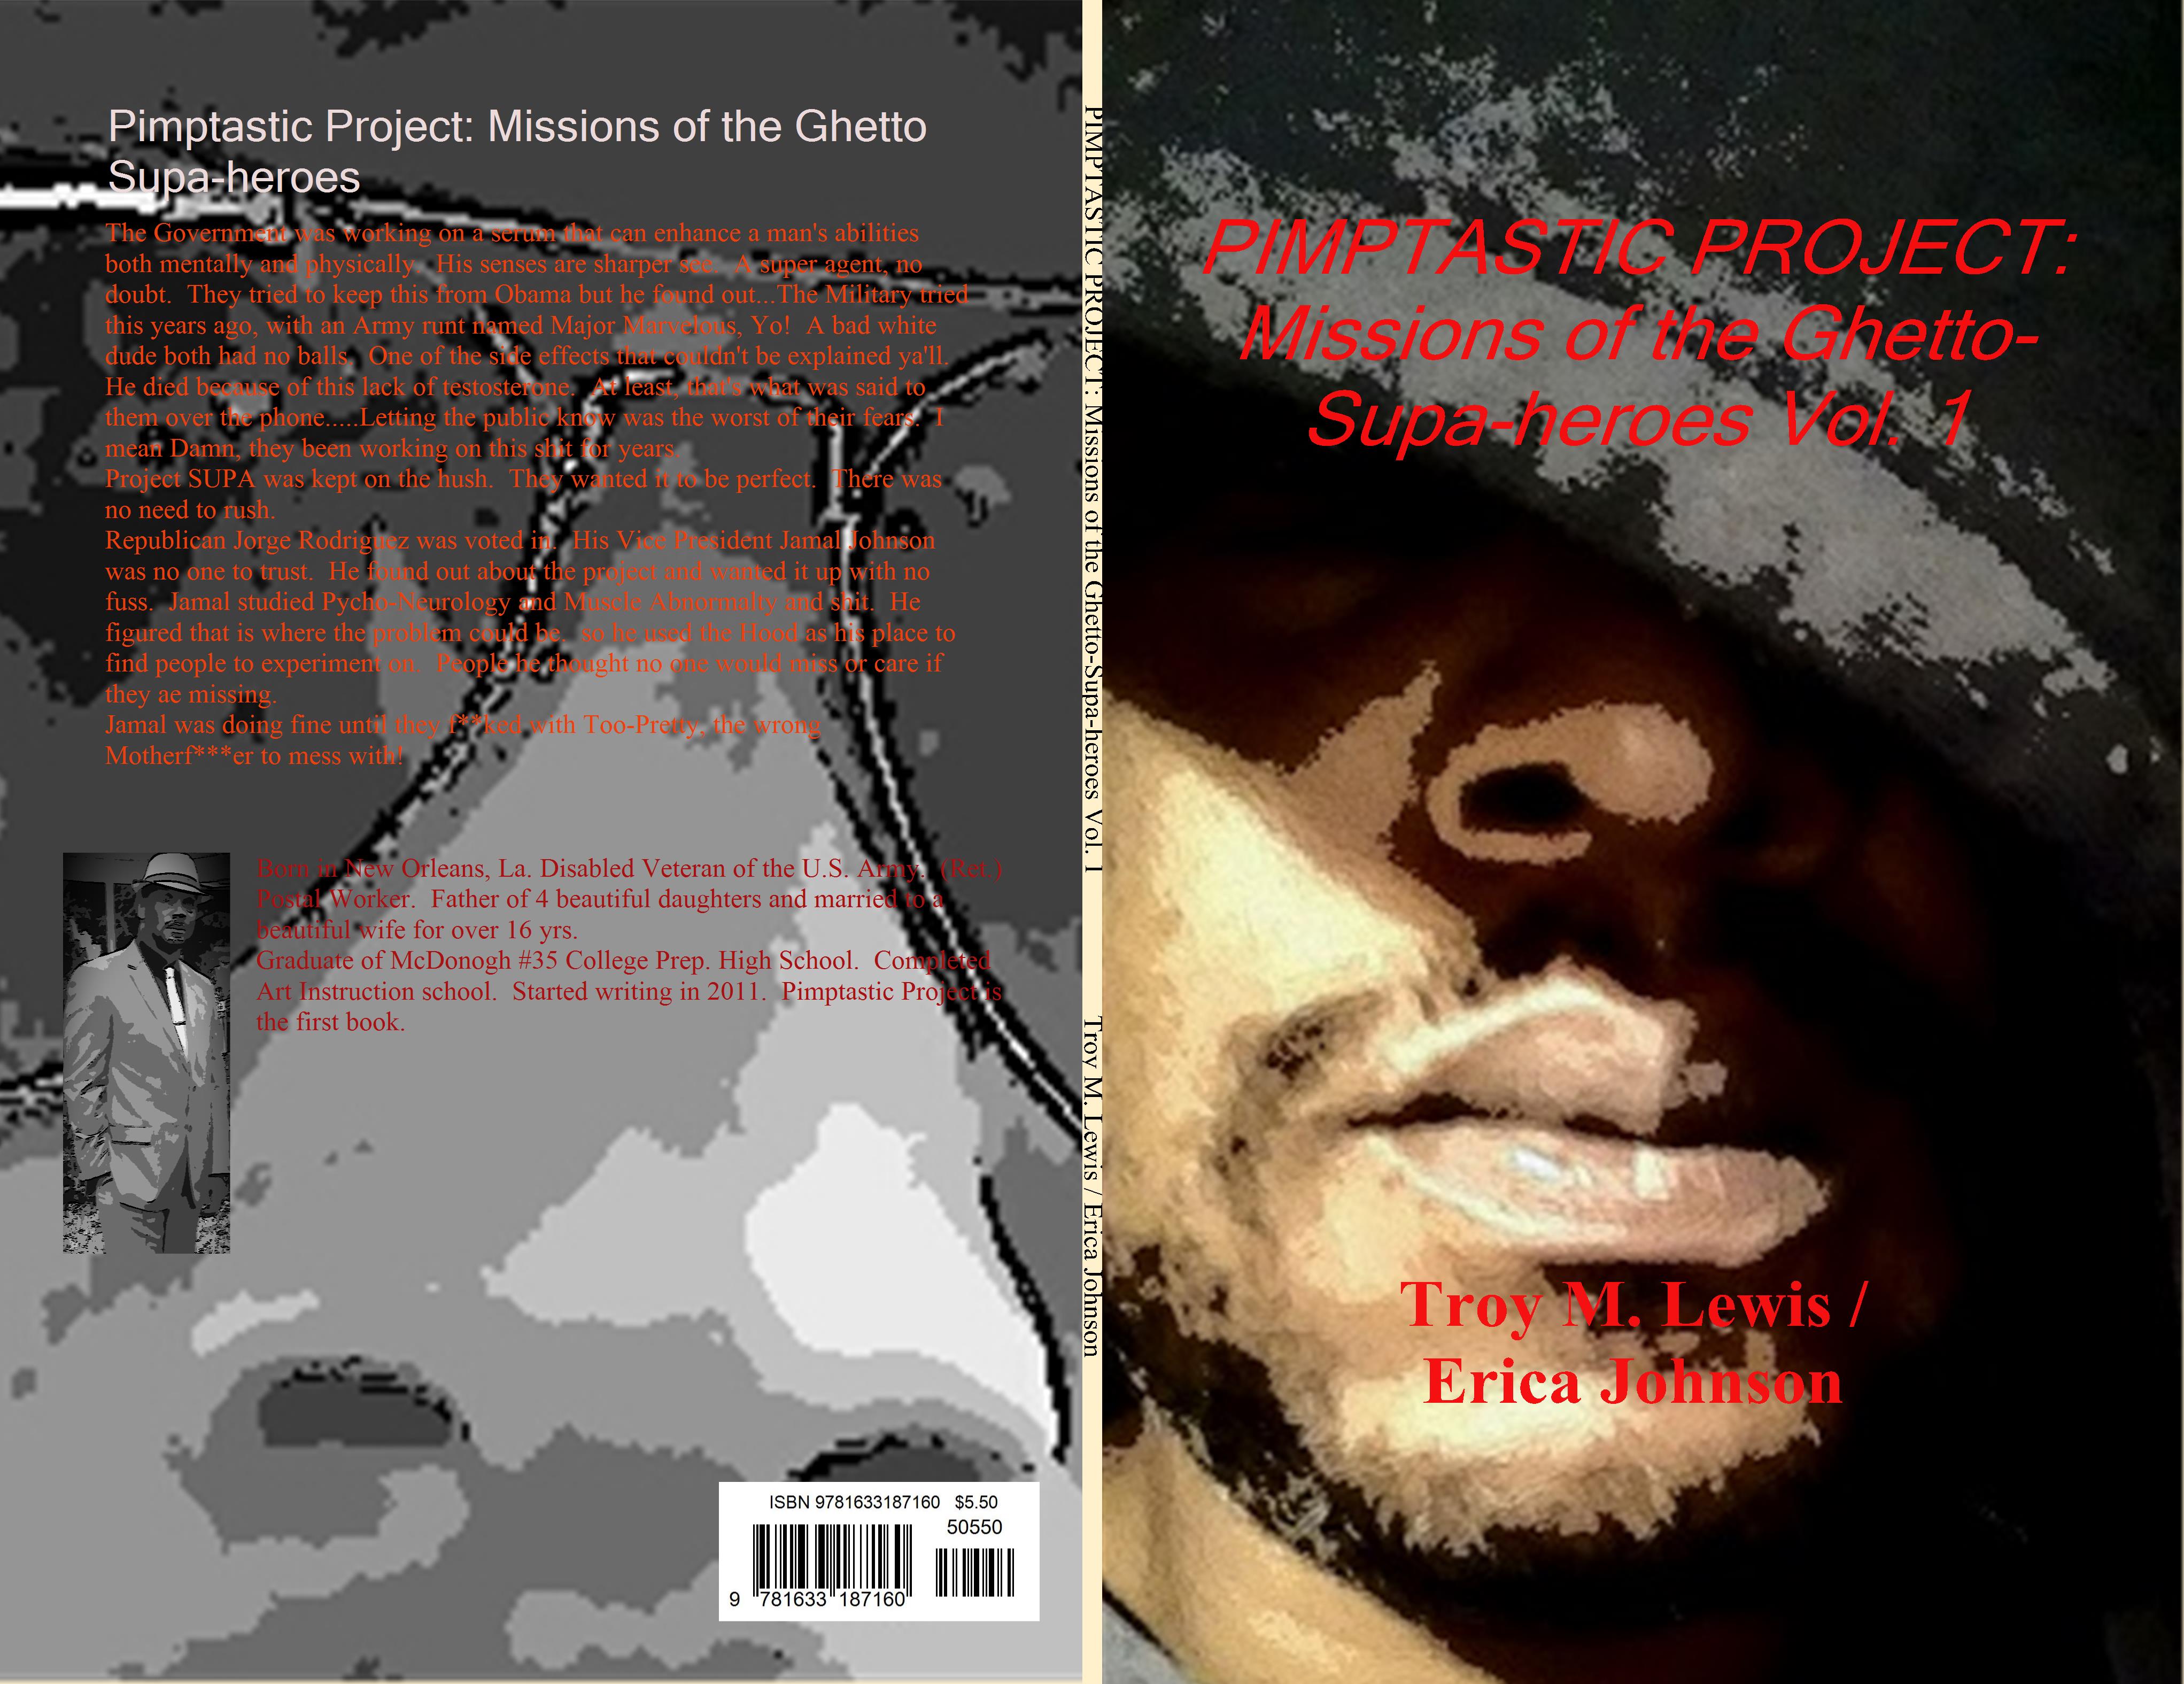 PIMPTASTIC PROJECT: Missions of the Ghetto-Supa-heroes Vol. 1 cover image